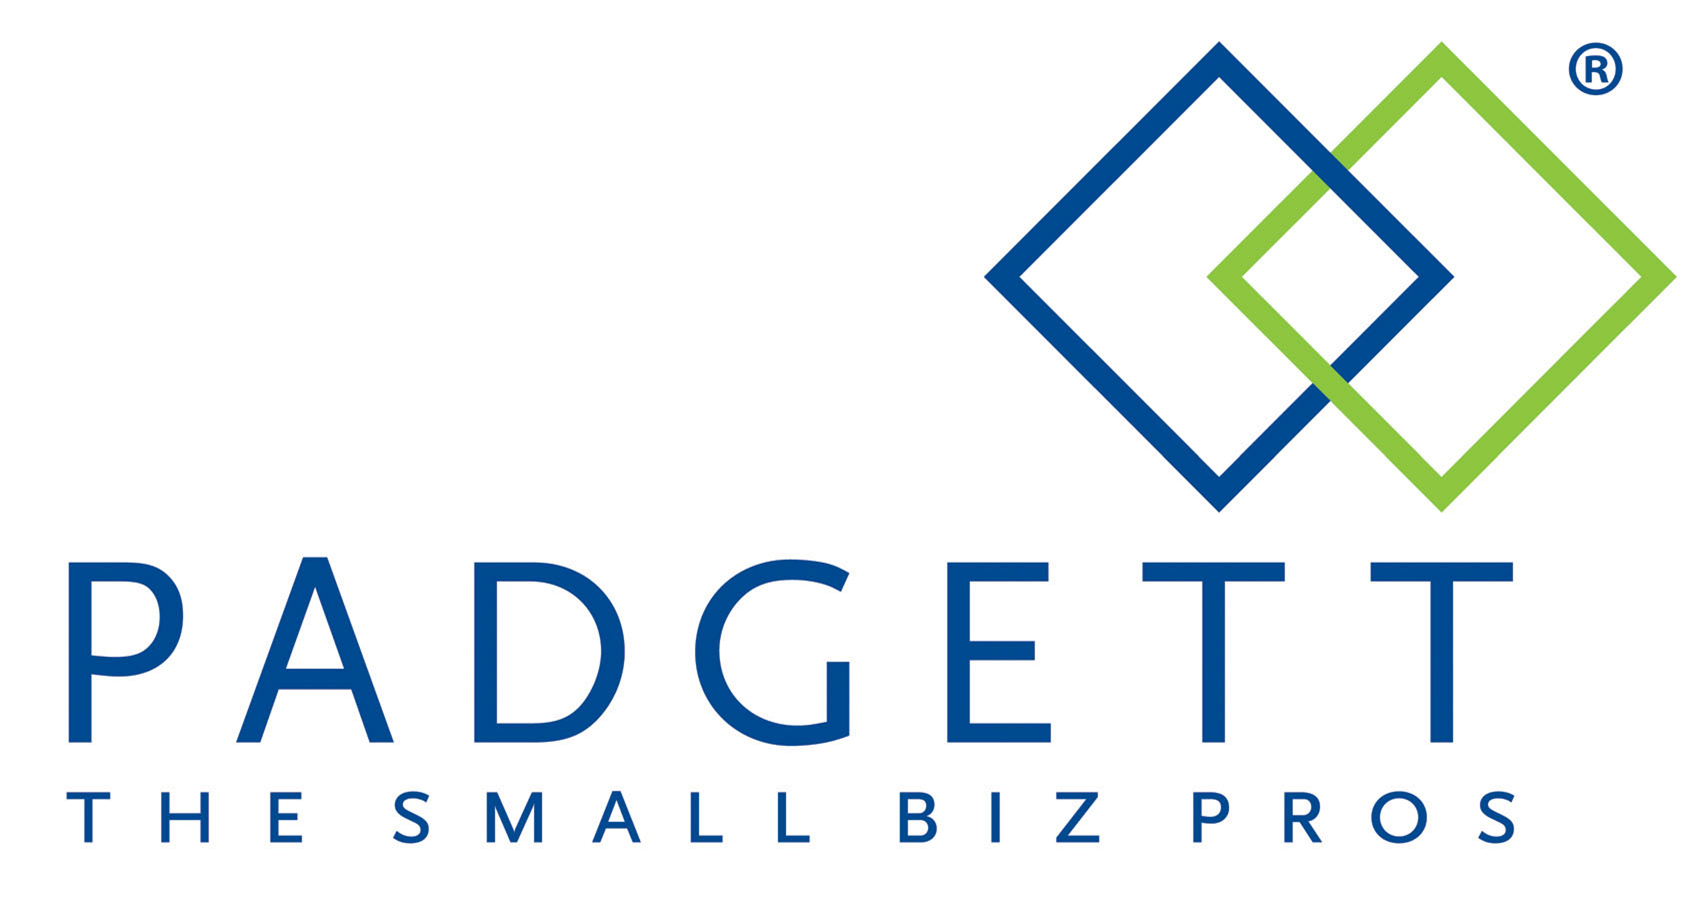 This image is the Padgett Business Services logo."